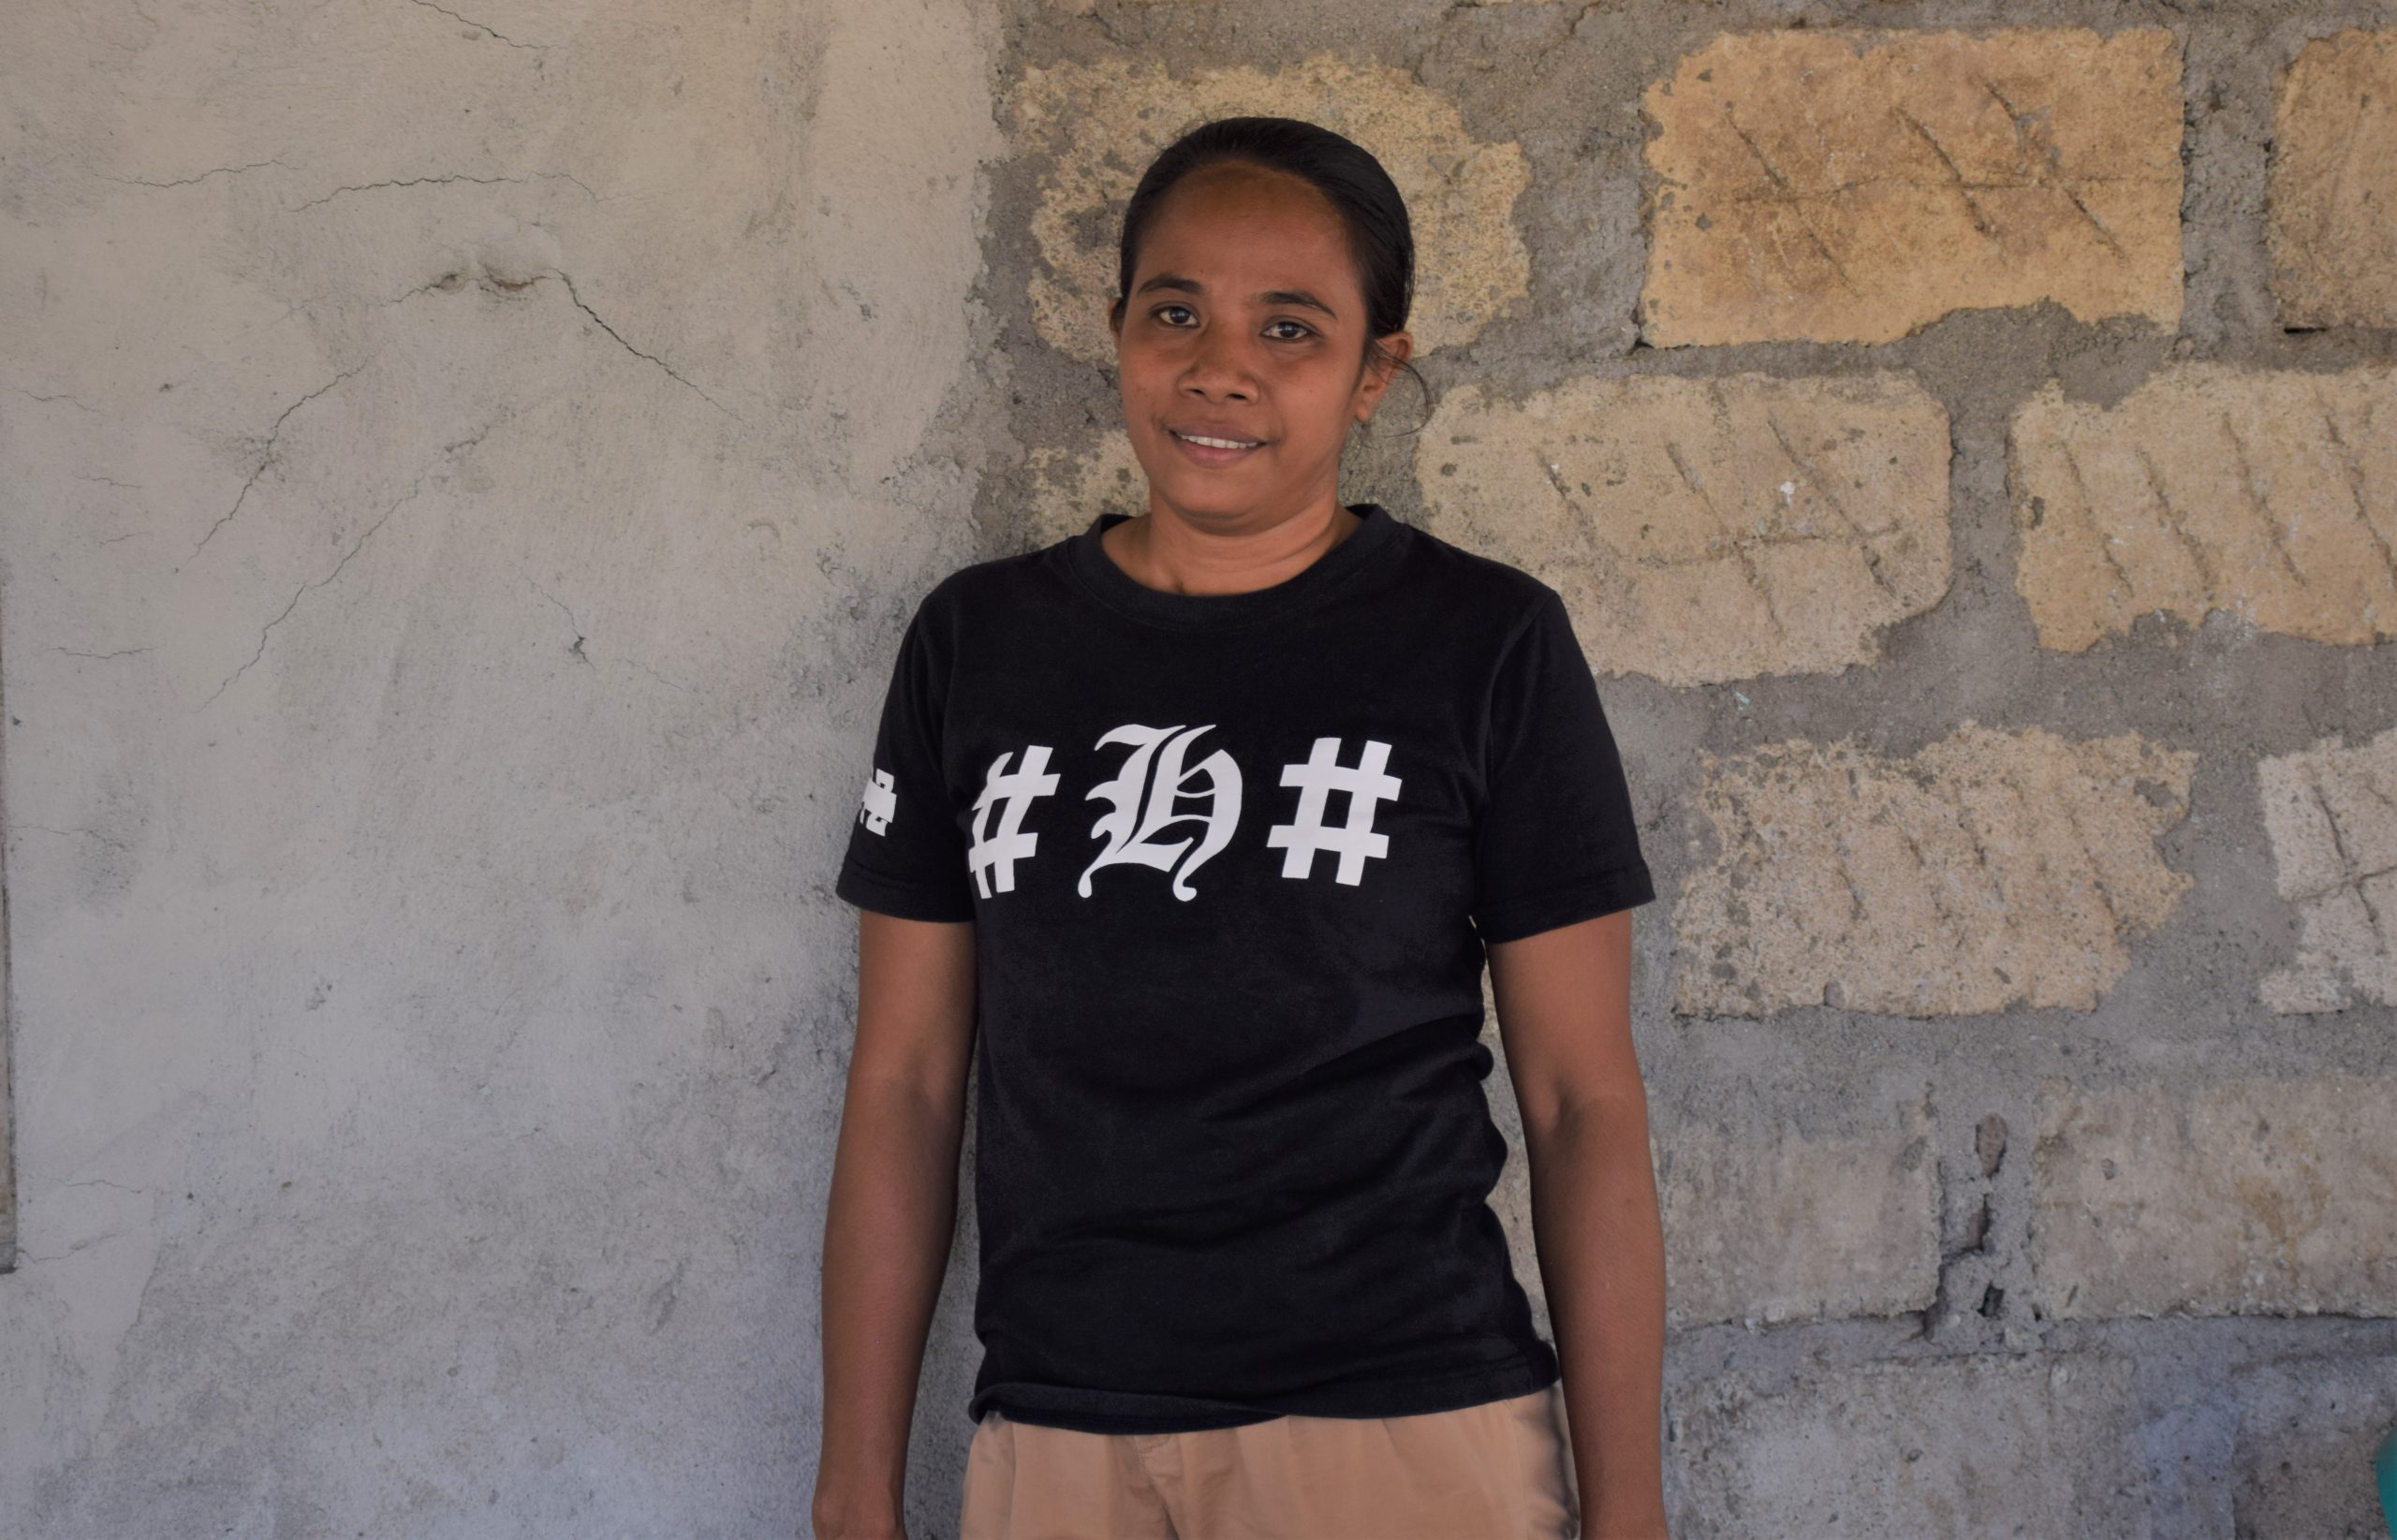 Oecusse, Timor-Leste: Ana started her own business after joining a savings group established by Oxfam and local partner Masine Neu Oecusse. Photo: Oxfam. This project is supported by the Australian Department of Foreign Affairs and Trade through the Australian NGO Cooperation Program (ANCP)